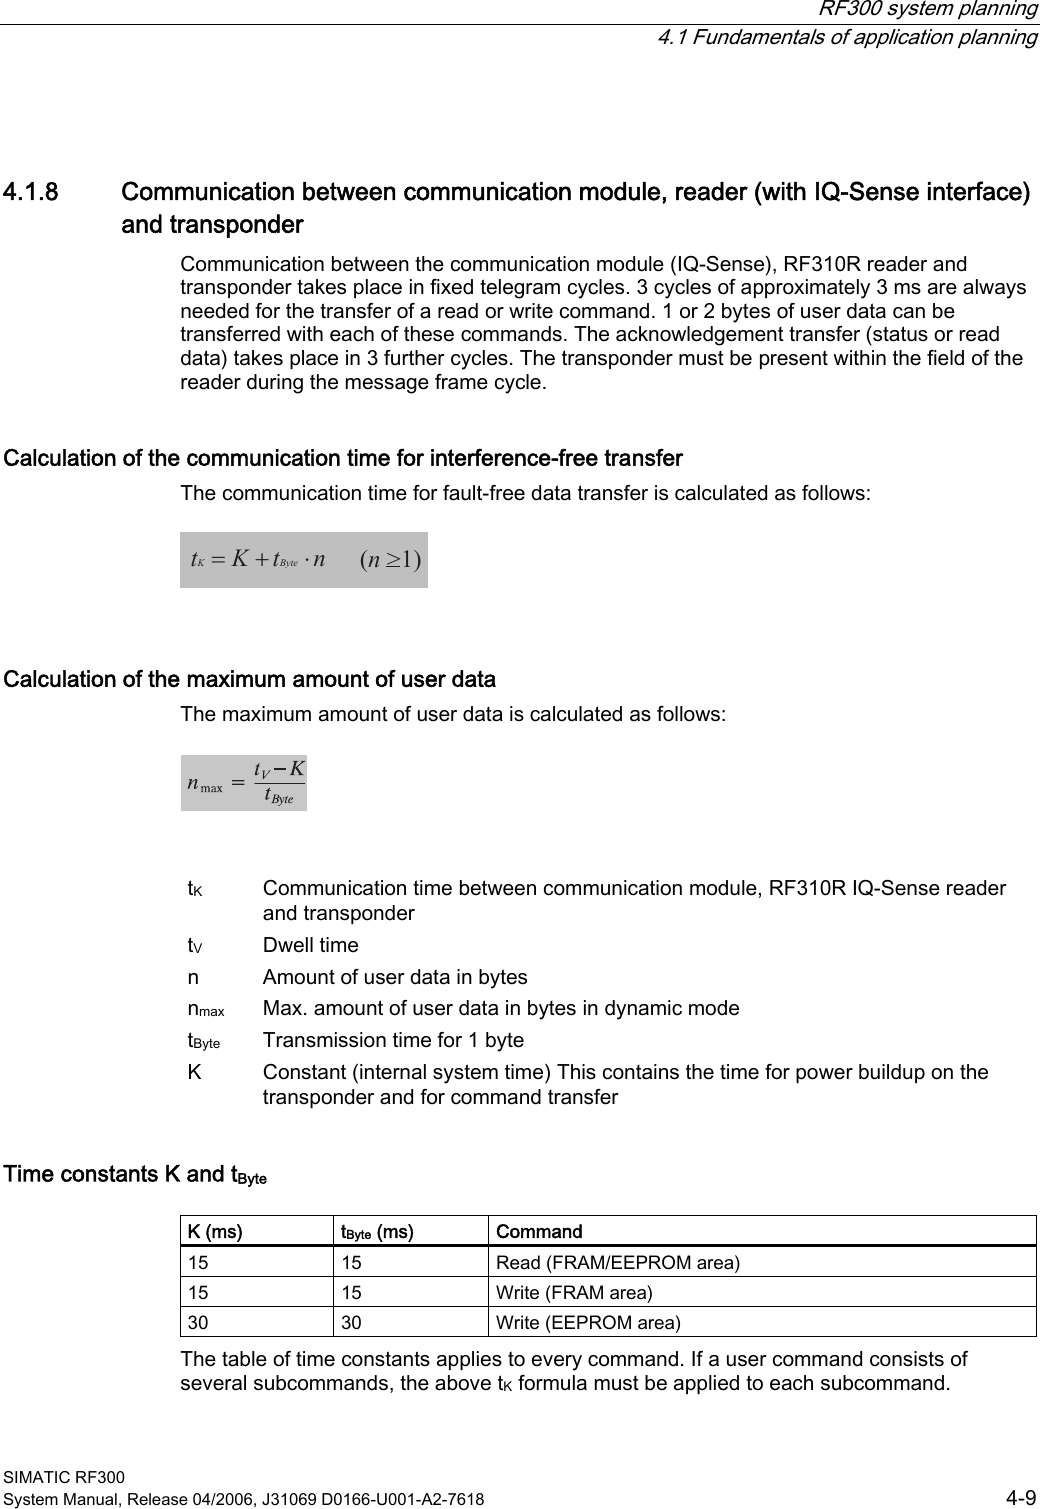  RF300 system planning   4.1 Fundamentals of application planning SIMATIC RF300 System Manual, Release 04/2006, J31069 D0166-U001-A2-7618  4-9 4.1.8  Communication between communication module, reader (with IQ-Sense interface) and transponder Communication between the communication module (IQ-Sense), RF310R reader and transponder takes place in fixed telegram cycles. 3 cycles of approximately 3 ms are always needed for the transfer of a read or write command. 1 or 2 bytes of user data can be transferred with each of these commands. The acknowledgement transfer (status or read data) takes place in 3 further cycles. The transponder must be present within the field of the reader during the message frame cycle. Calculation of the communication time for interference-free transfer The communication time for fault-free data transfer is calculated as follows:  =+ ⋅tKtnKByte(n &gt;1)  Calculation of the maximum amount of user data The maximum amount of user data is calculated as follows:     tK  Communication time between communication module, RF310R IQ-Sense reader and transponder tV  Dwell time  n  Amount of user data in bytes nmax  Max. amount of user data in bytes in dynamic mode tByte  Transmission time for 1 byte K  Constant (internal system time) This contains the time for power buildup on the transponder and for command transfer Time constants K and tByte  K (ms)  tByte (ms)  Command 15  15  Read (FRAM/EEPROM area) 15  15  Write (FRAM area) 30  30  Write (EEPROM area) The table of time constants applies to every command. If a user command consists of several subcommands, the above tK formula must be applied to each subcommand. 